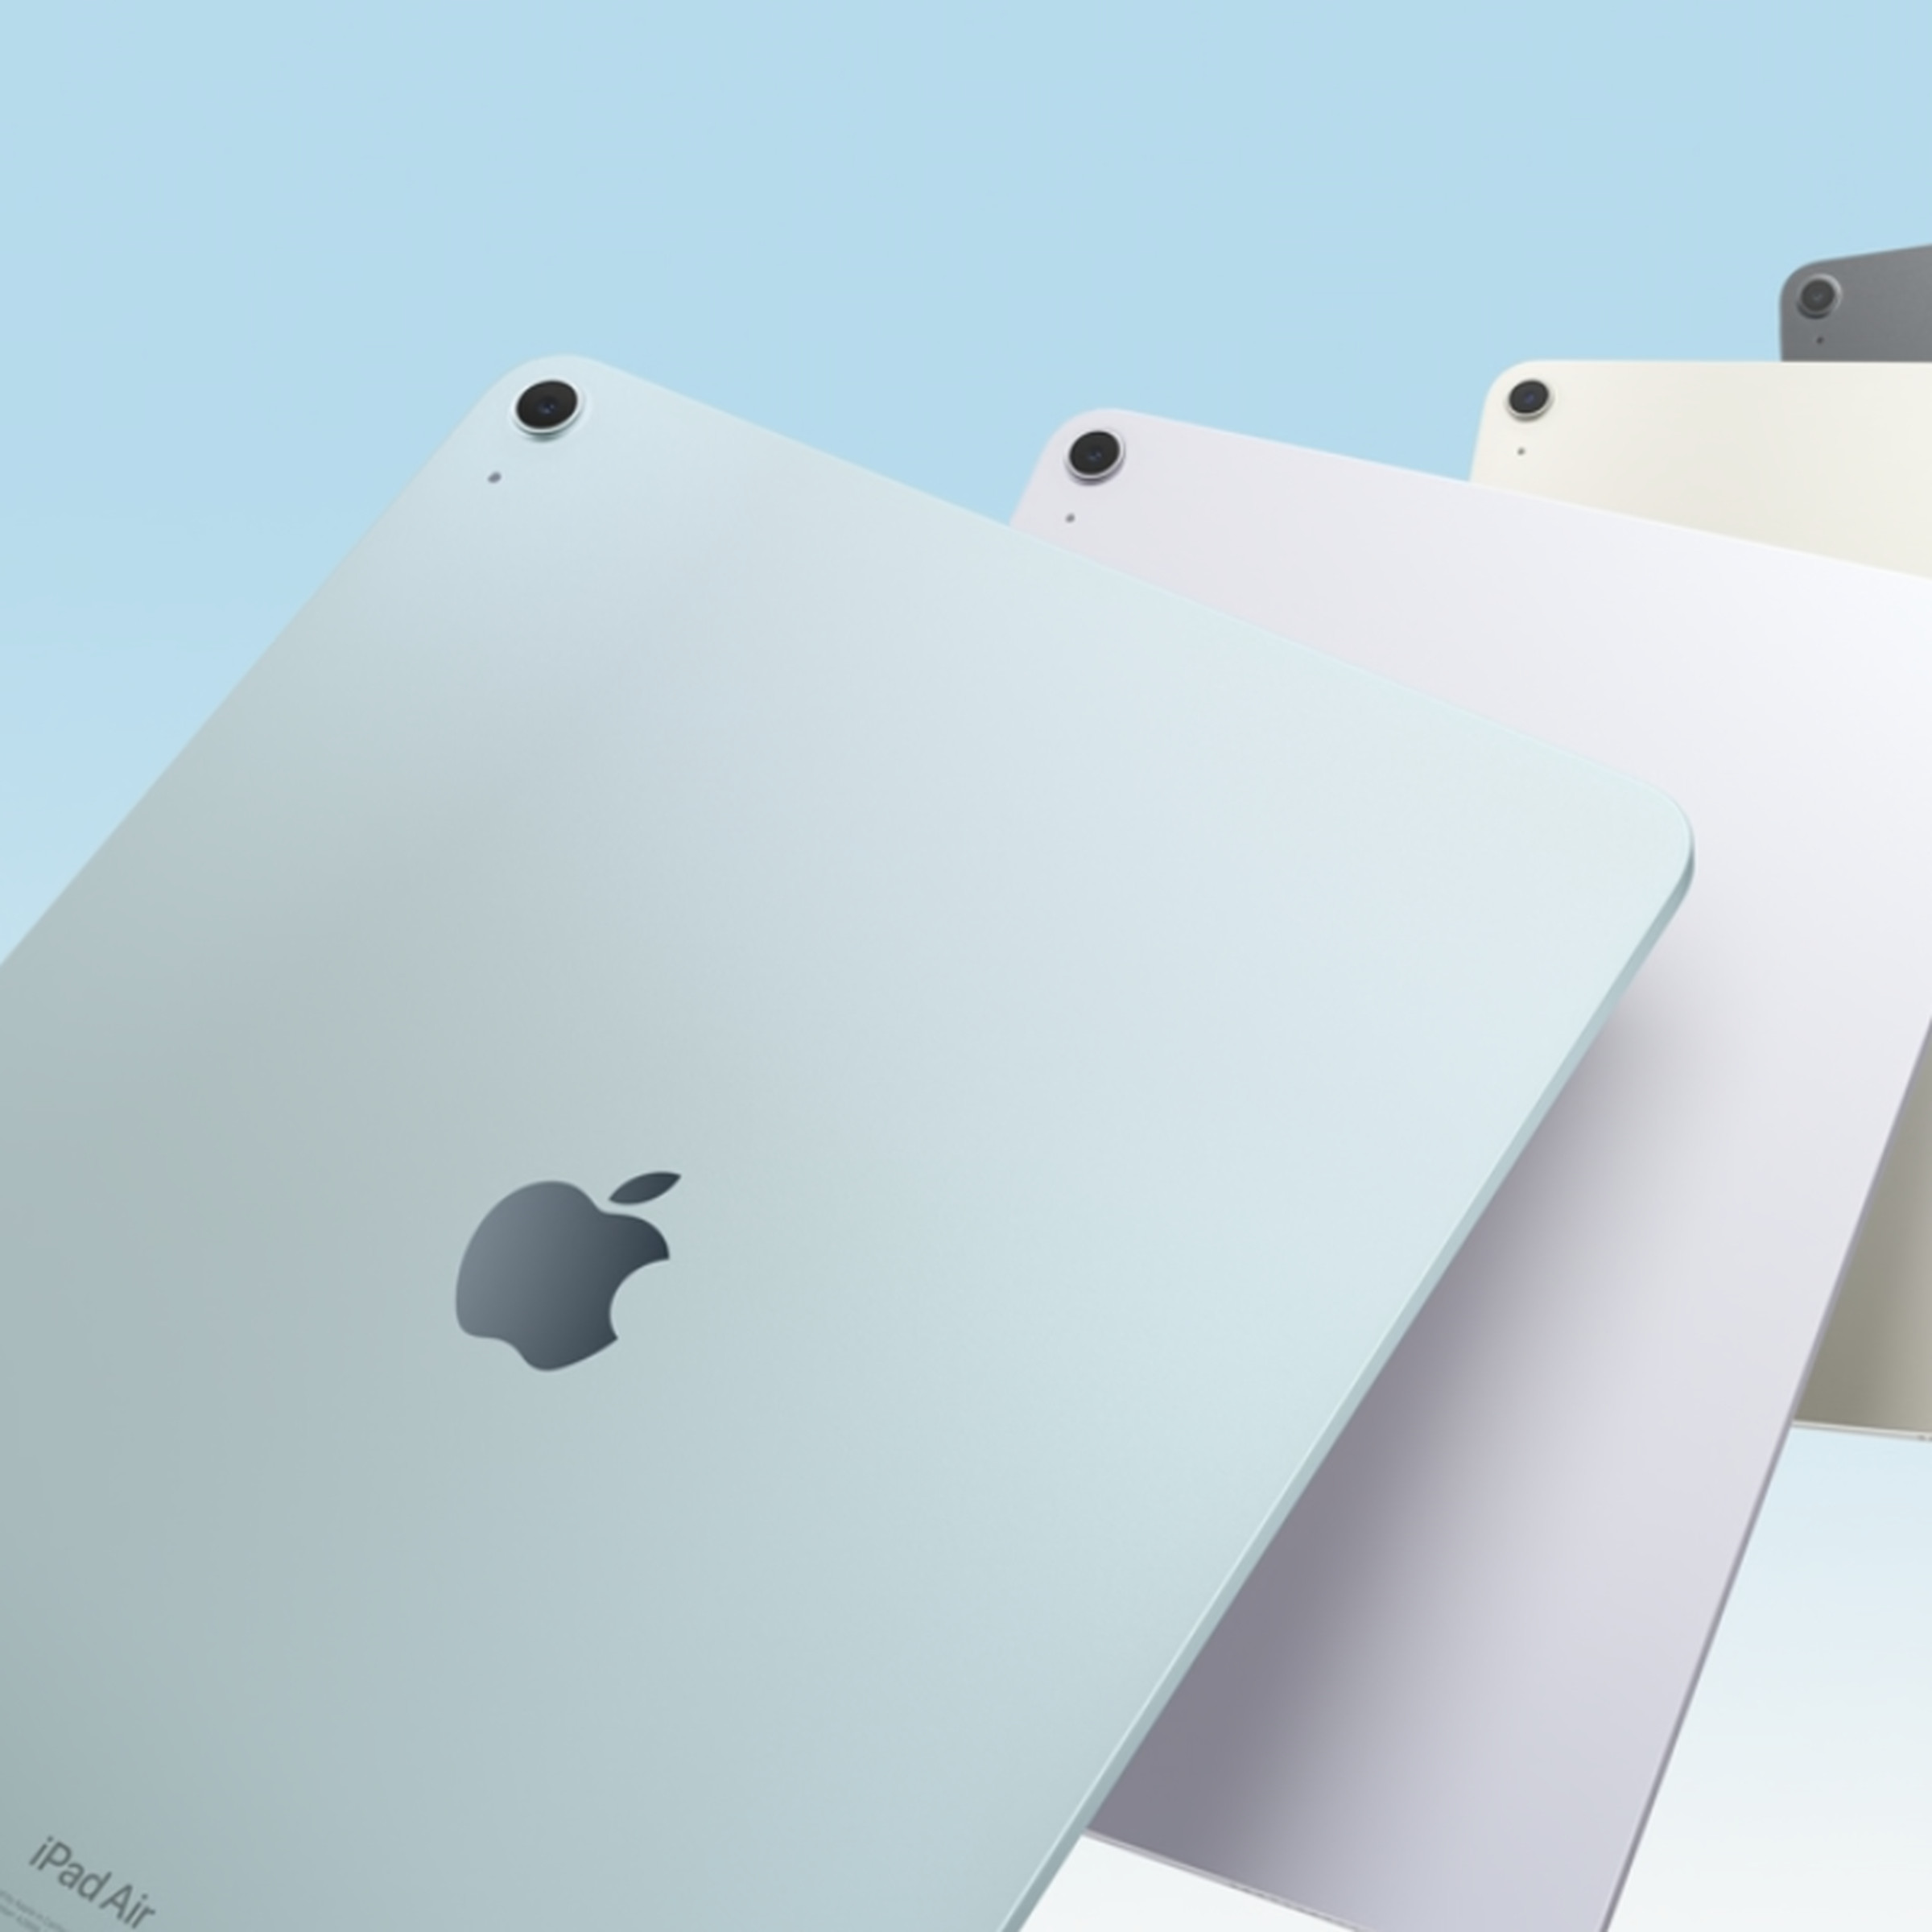 An image showing Apple’s iPad Air lineup